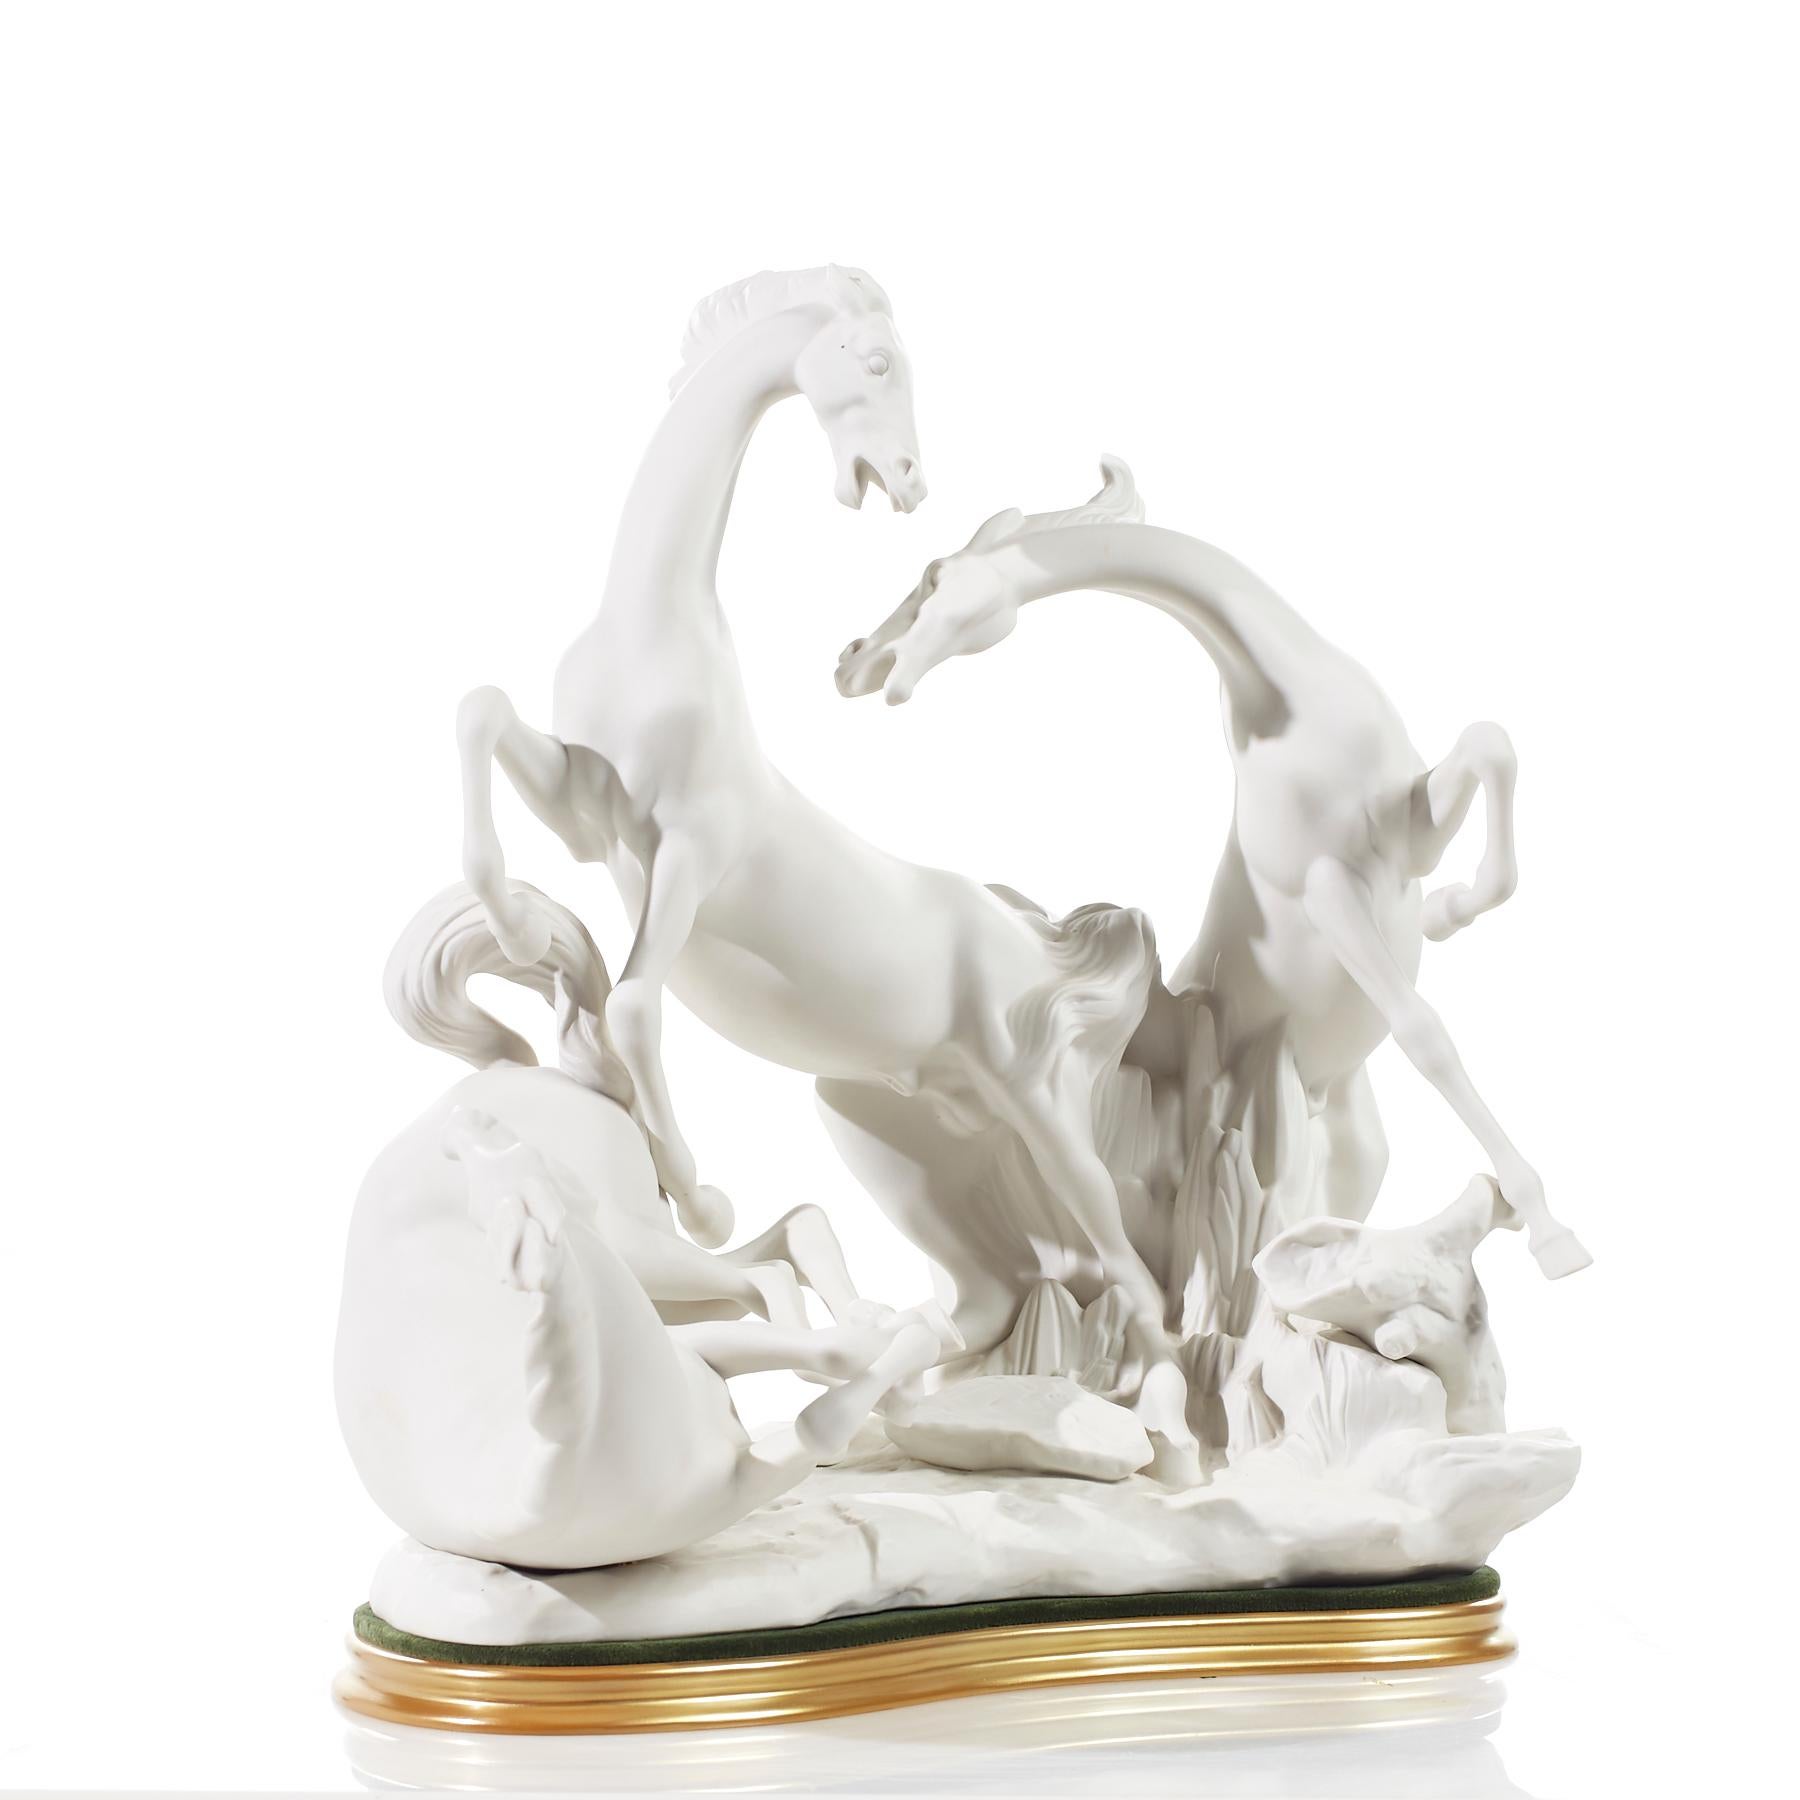 Lladro 1022 Porcelain Playful Horses Sculpture

This sculpture measures: 18 wide x 13 deep x 19 high

We take our photos in a controlled lighting studio to show as much detail as possible. We do not photoshop out blemishes. 

We keep you fully